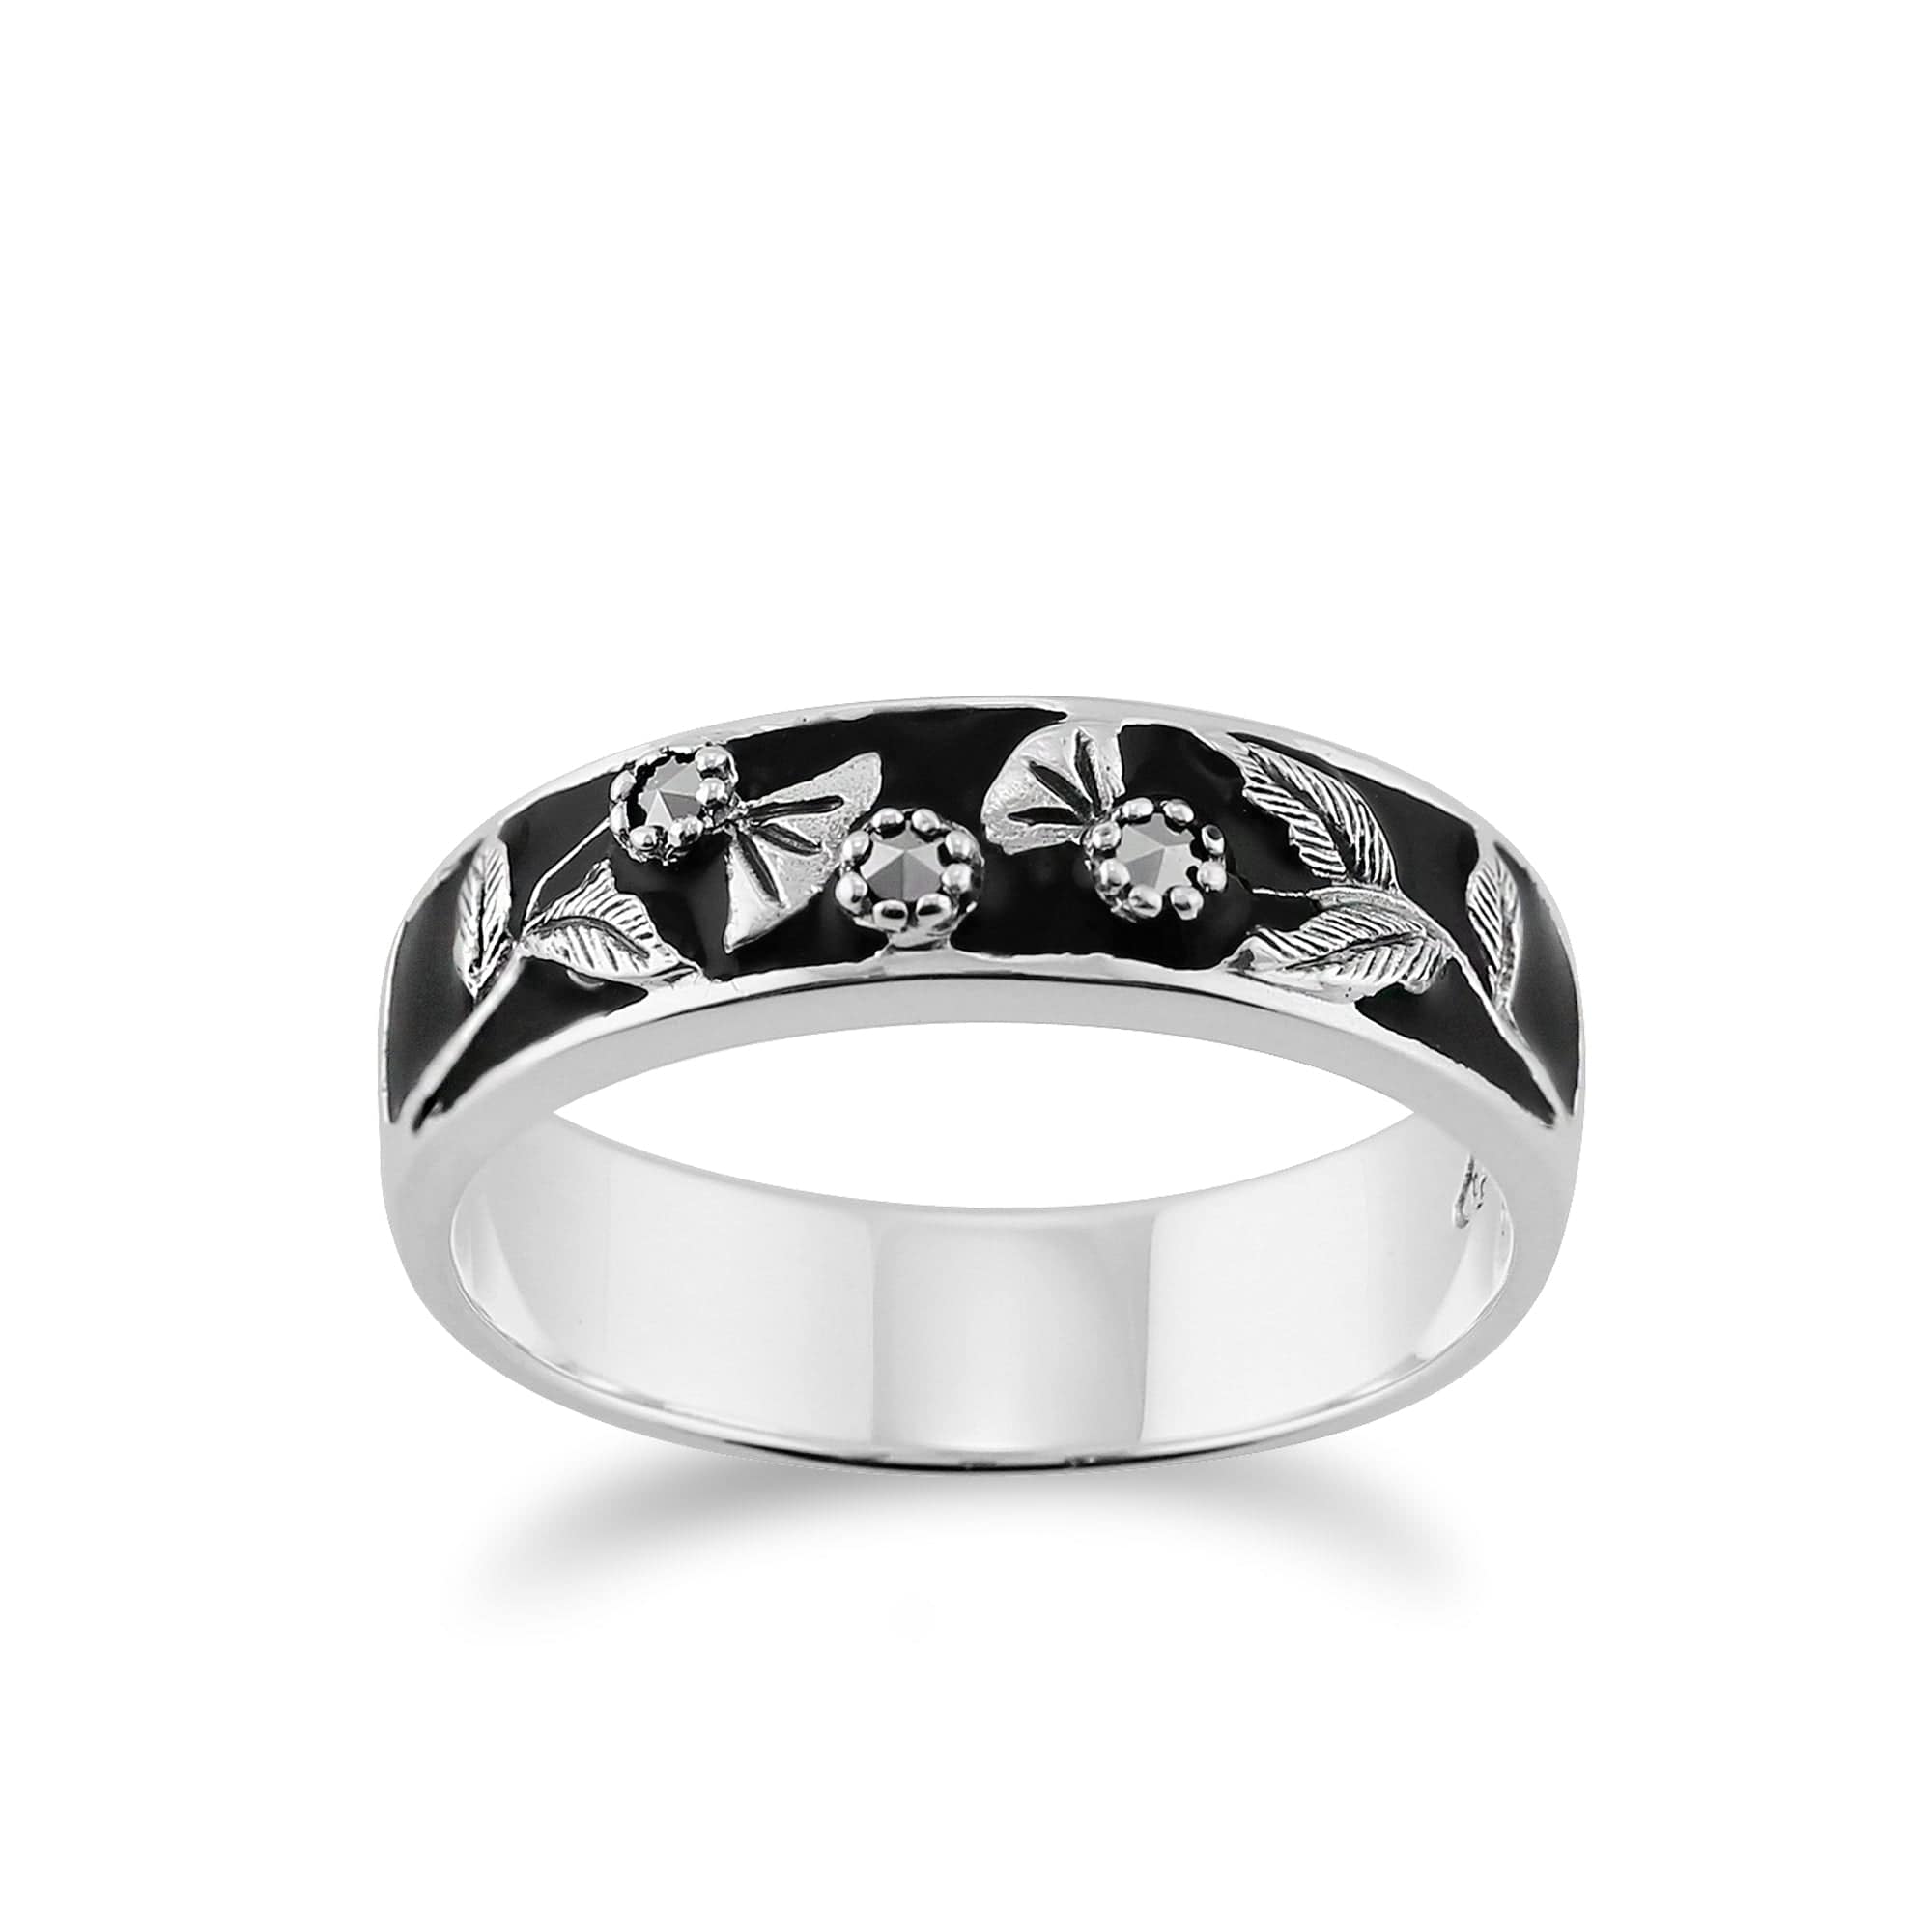 Floral Round Marcasite & Black Enamel Thisstle Band Ring in 925 Sterling Silver - Gemondo